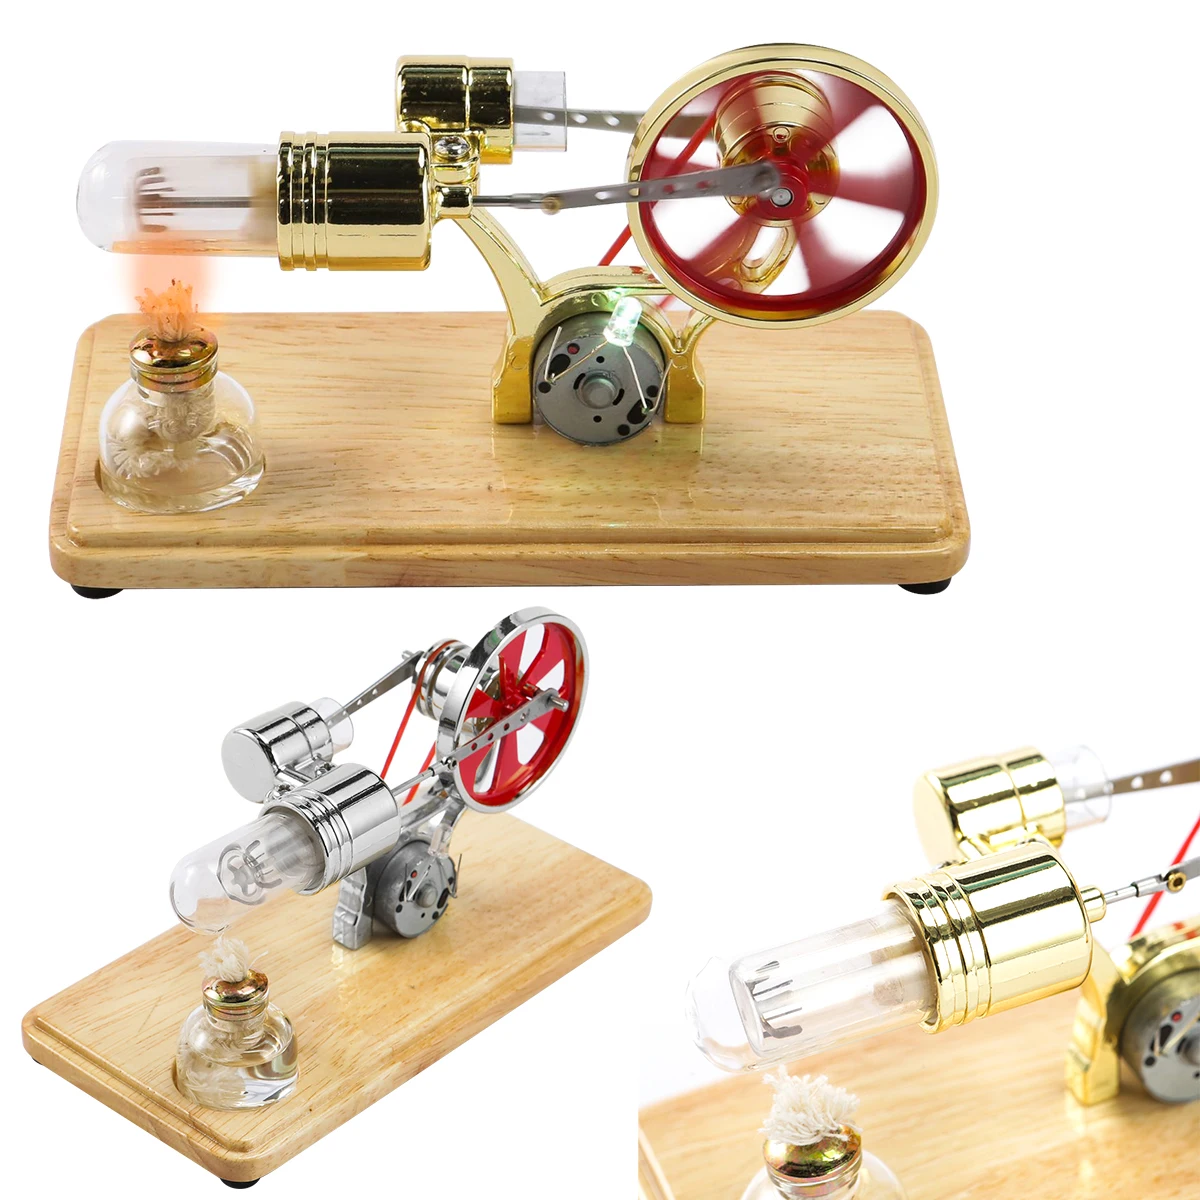 

Stirling Engine Motor Model Heat Steam Education DIY Model Toy Gift For Kids Discovery Toy Learning Science Experiment Toys